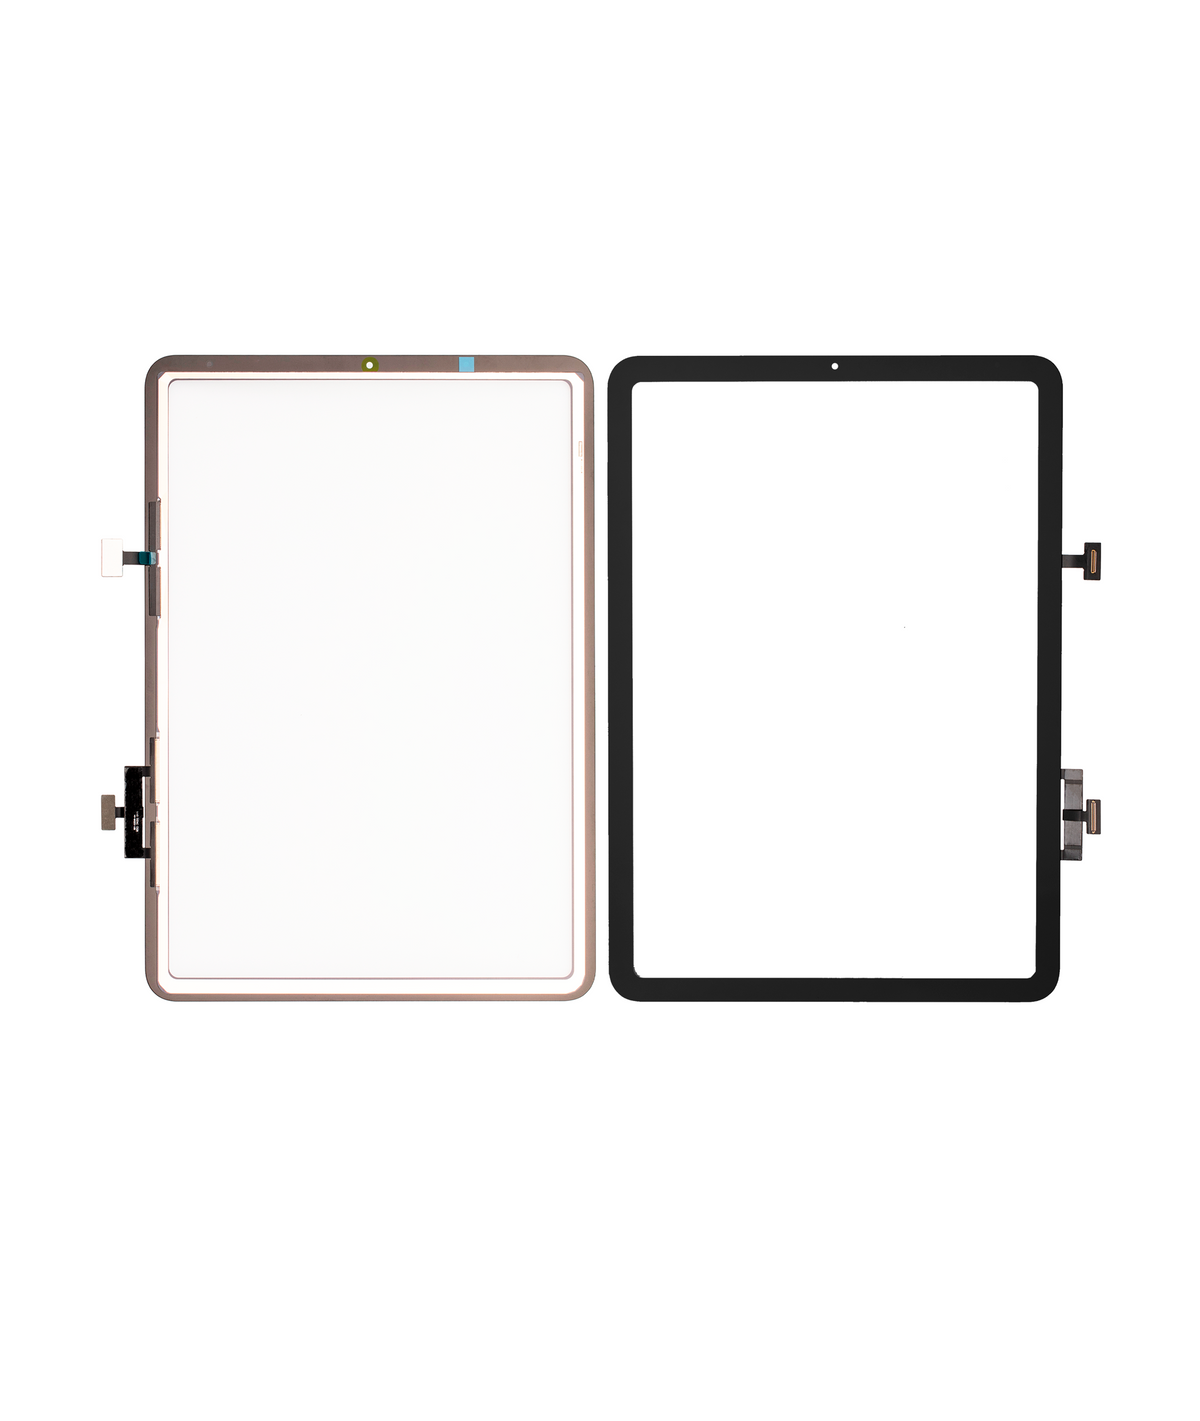 DIGITIZER (GLASS SEPARATION REQUIRED) (4G VERSION) FOR IPAD AIR 4